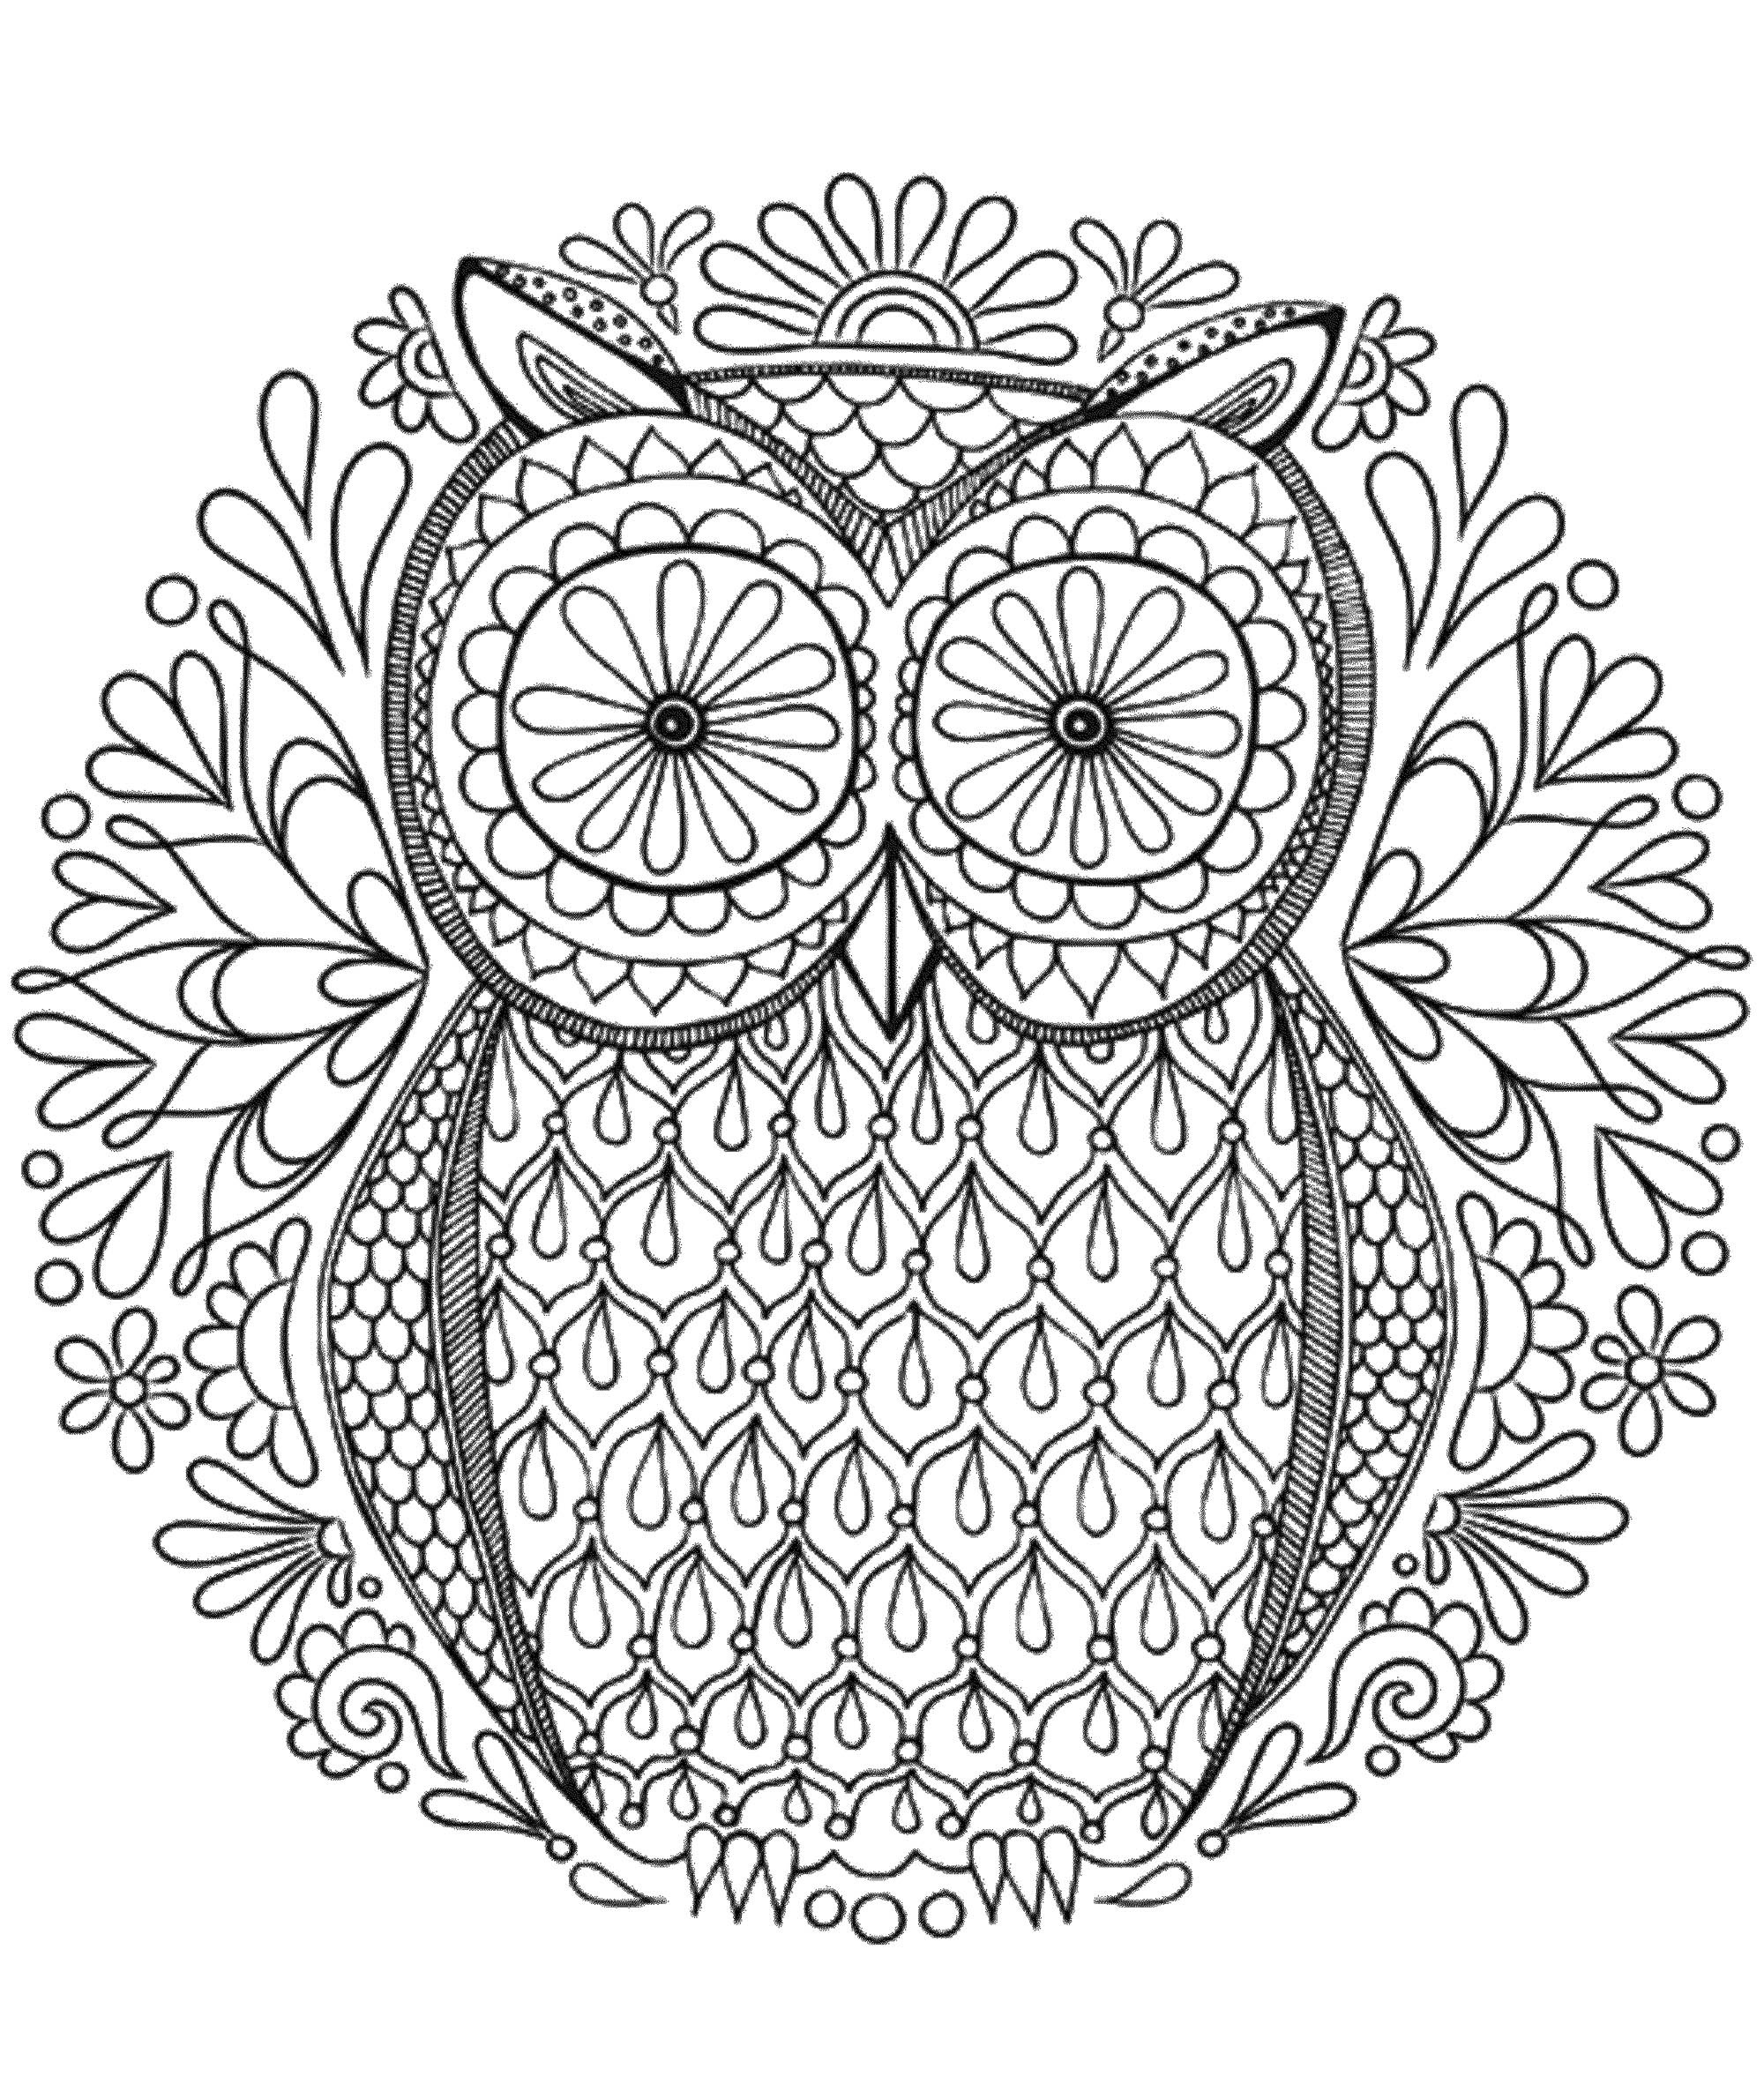 Mandala Coloring Pages Pdf
 Mandala to in pdf 6 M&alas Adult Coloring Pages